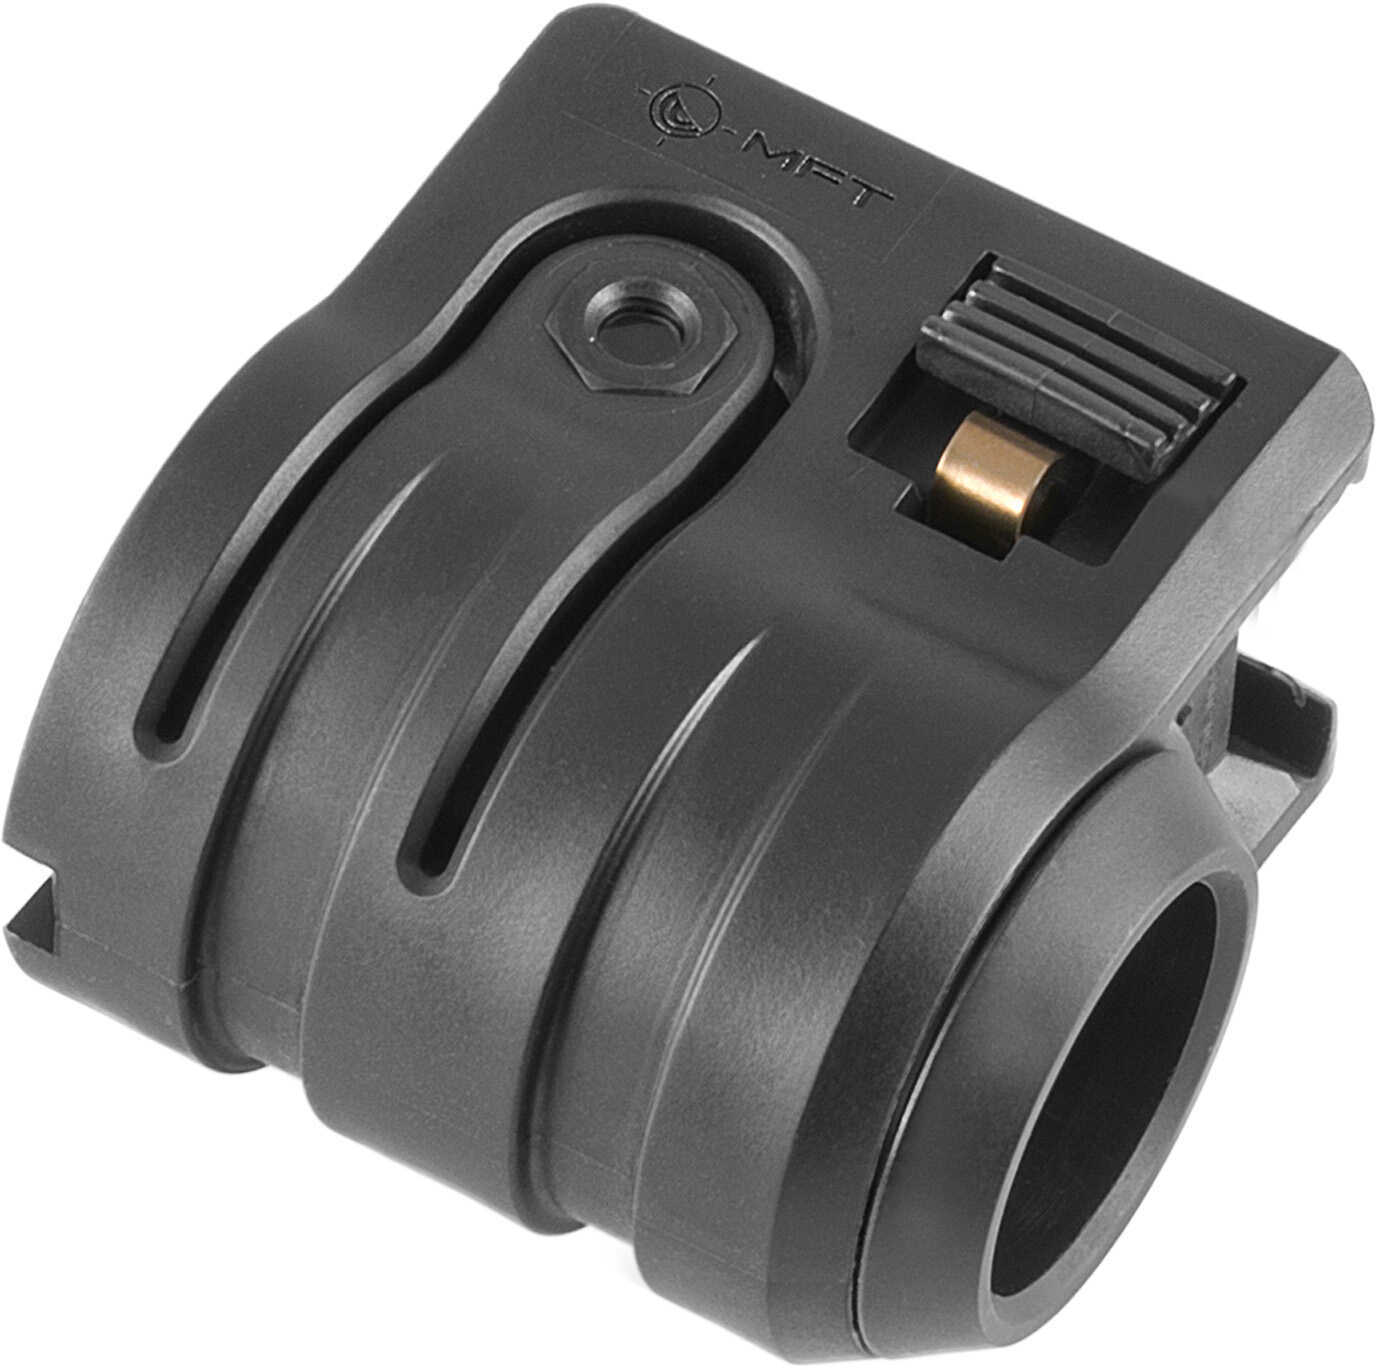 Mission First Tactical MFT Torch Standard Mount For 1", 3/4" Or 5/8" Quick Detach